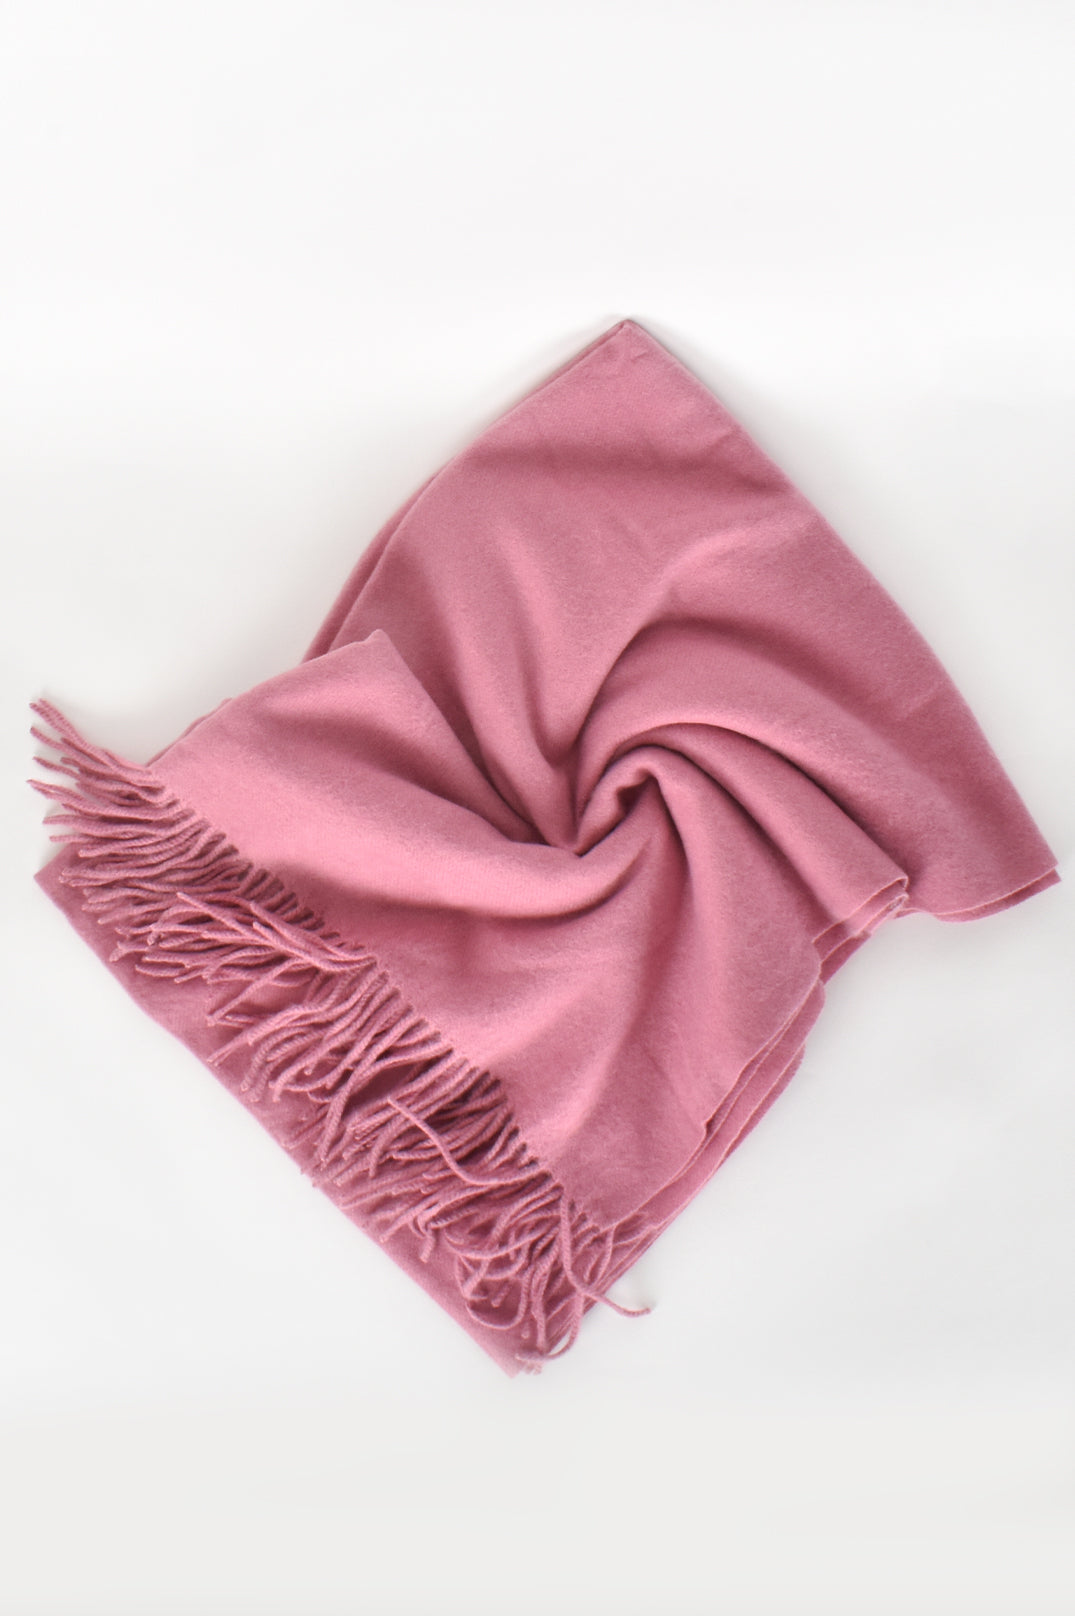 Get cosy fringe Scarf in Sage and Dusty Pink by Adorne